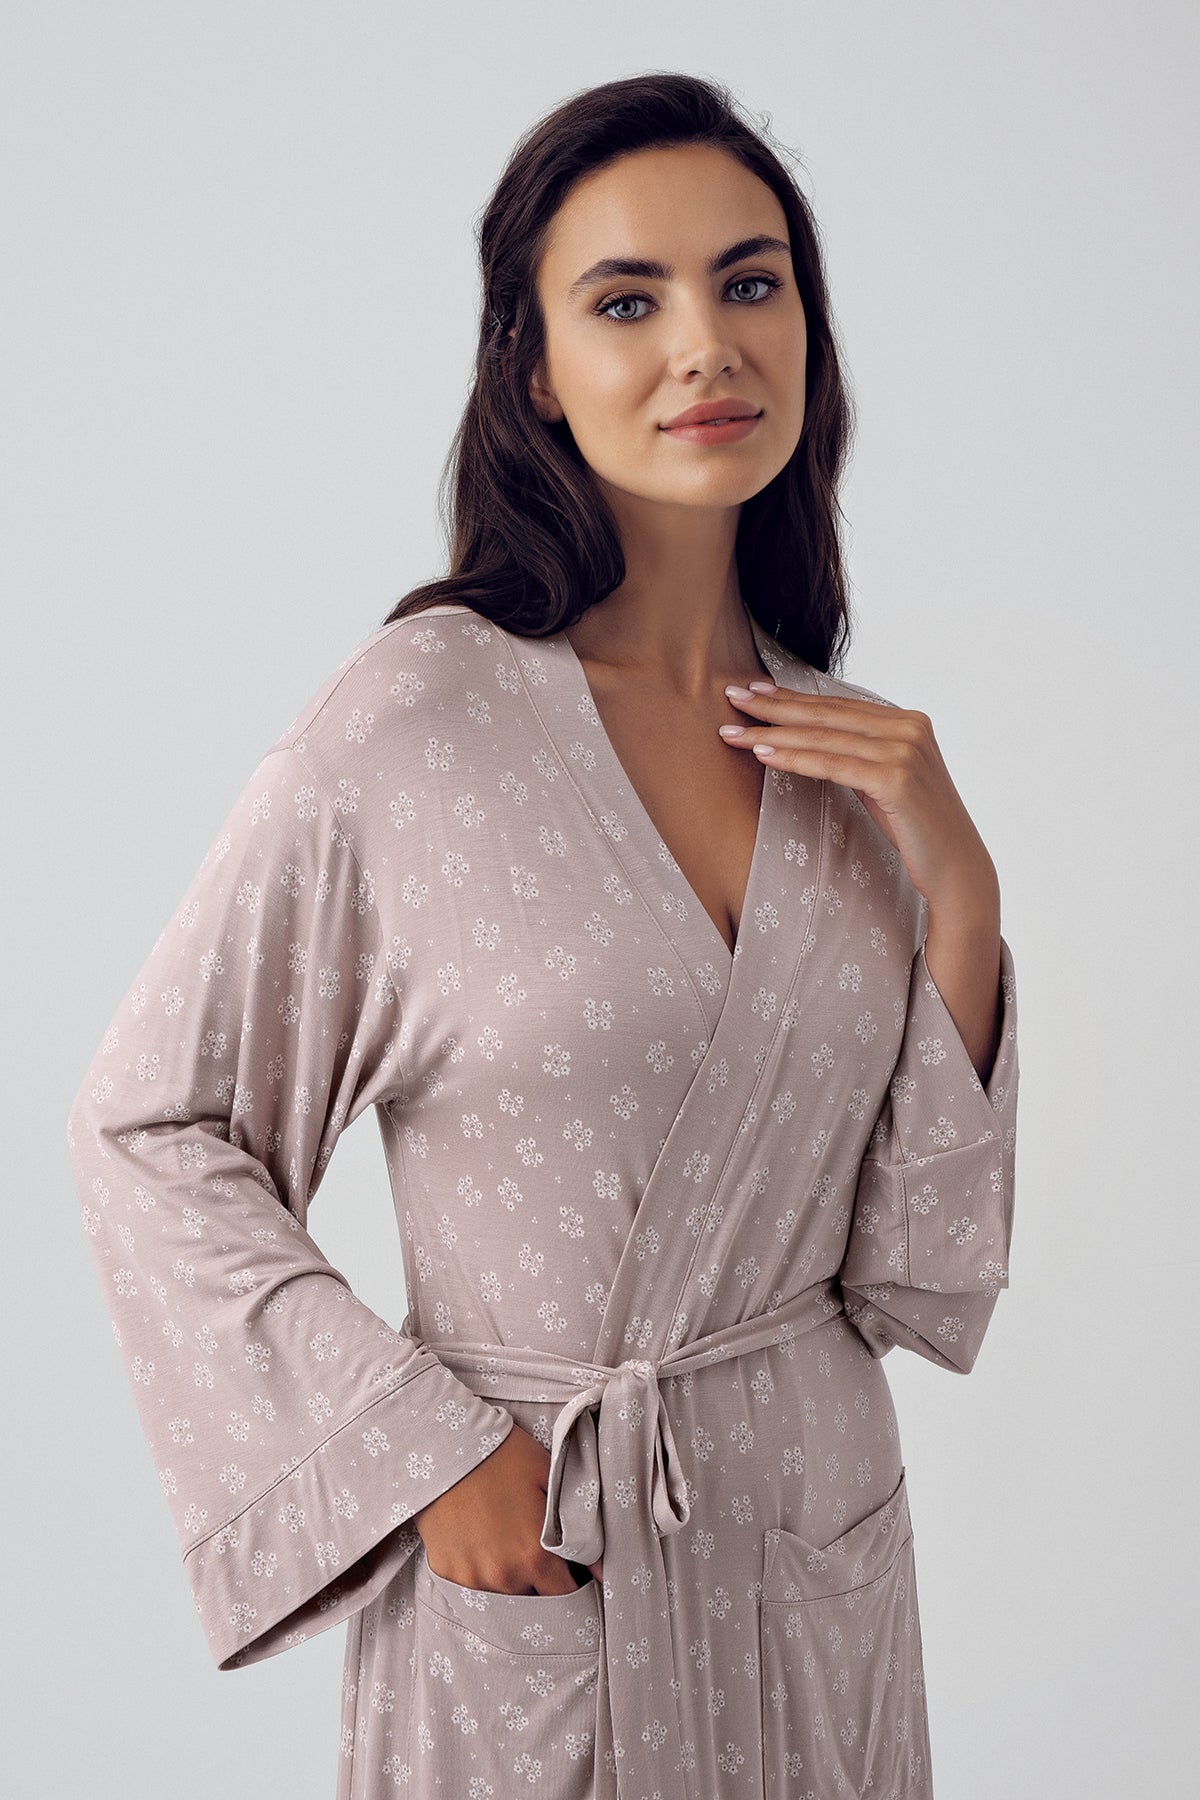 Shopymommy 15505 Patterned Maternity Robe Coffee